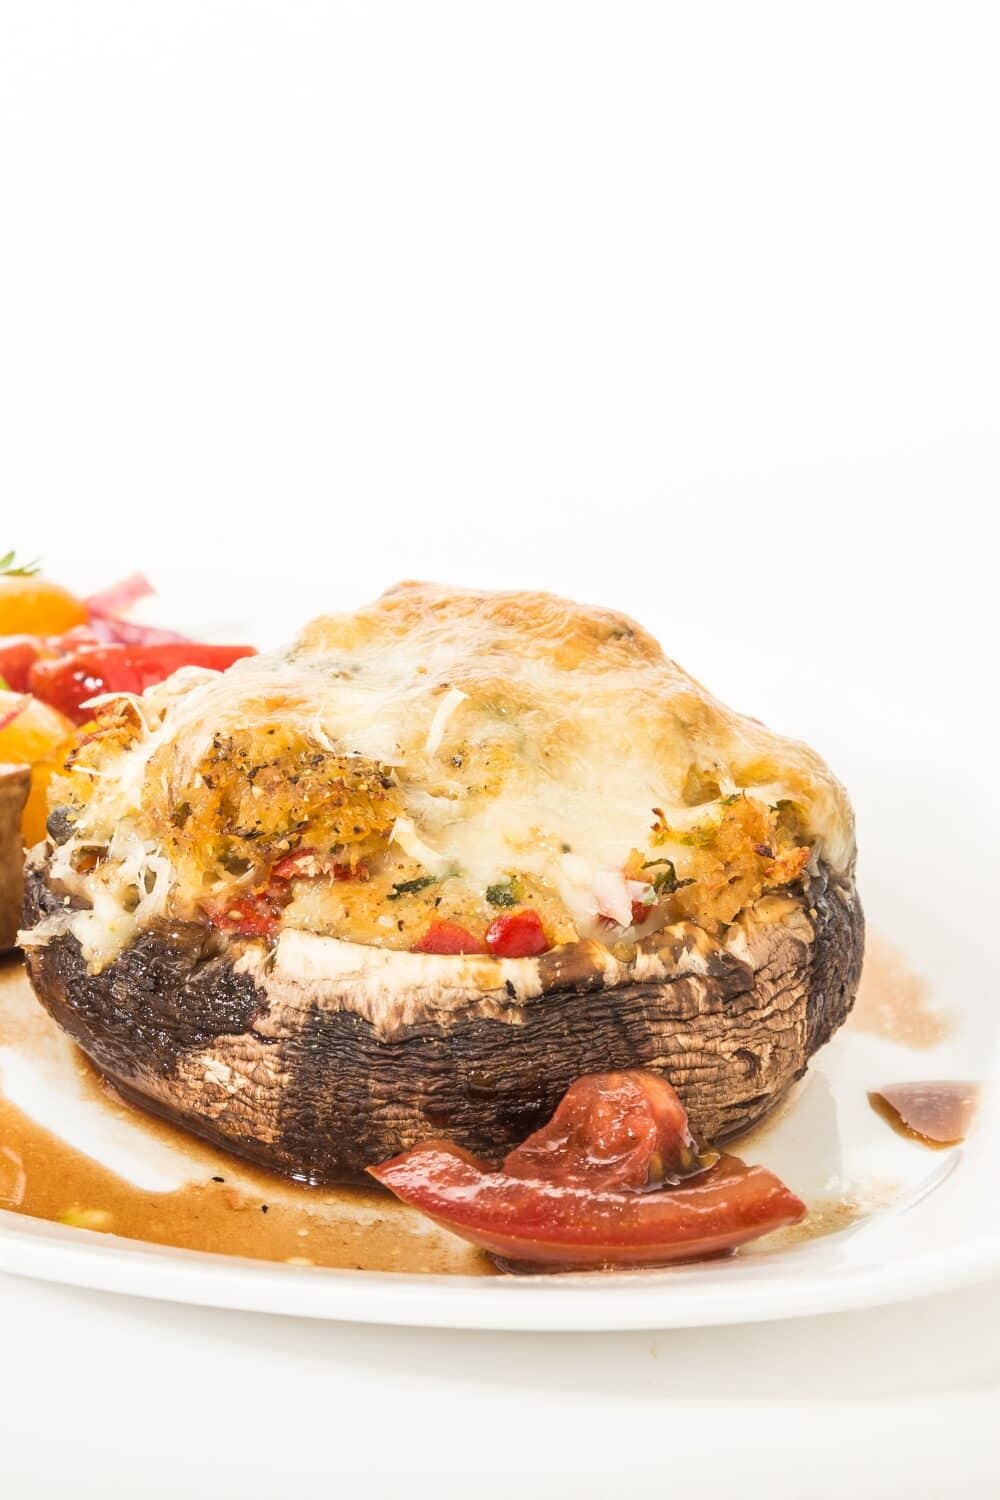 Caprese Stuffed Portobello Mushrooms, a delightful vegetarian dish. Large, meaty Portobello mushrooms are generously filled with a classic Caprese combination of fresh mozzarella cheese, ripe tomato slices, and fragrant basil leaves. The mushrooms are baked to perfection, resulting in a savory and gooey texture. This visually appealing dish is a burst of flavors, showcasing the perfect balance of tangy cheese, juicy tomatoes, and aromatic herbs.